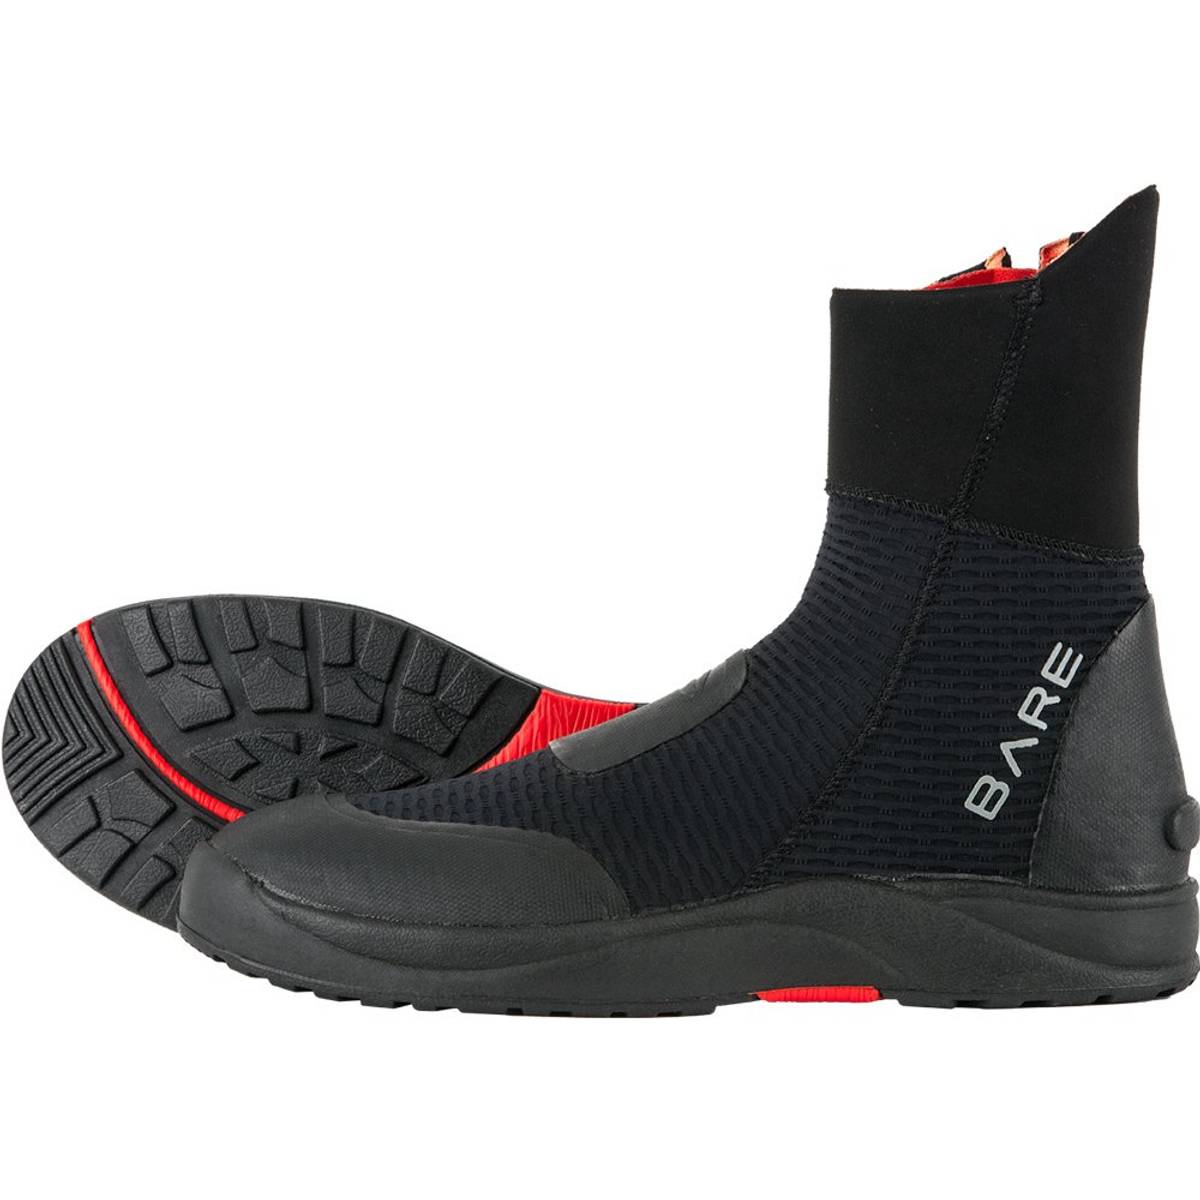 ONLY Ultrawarmth wet shoes 5mm